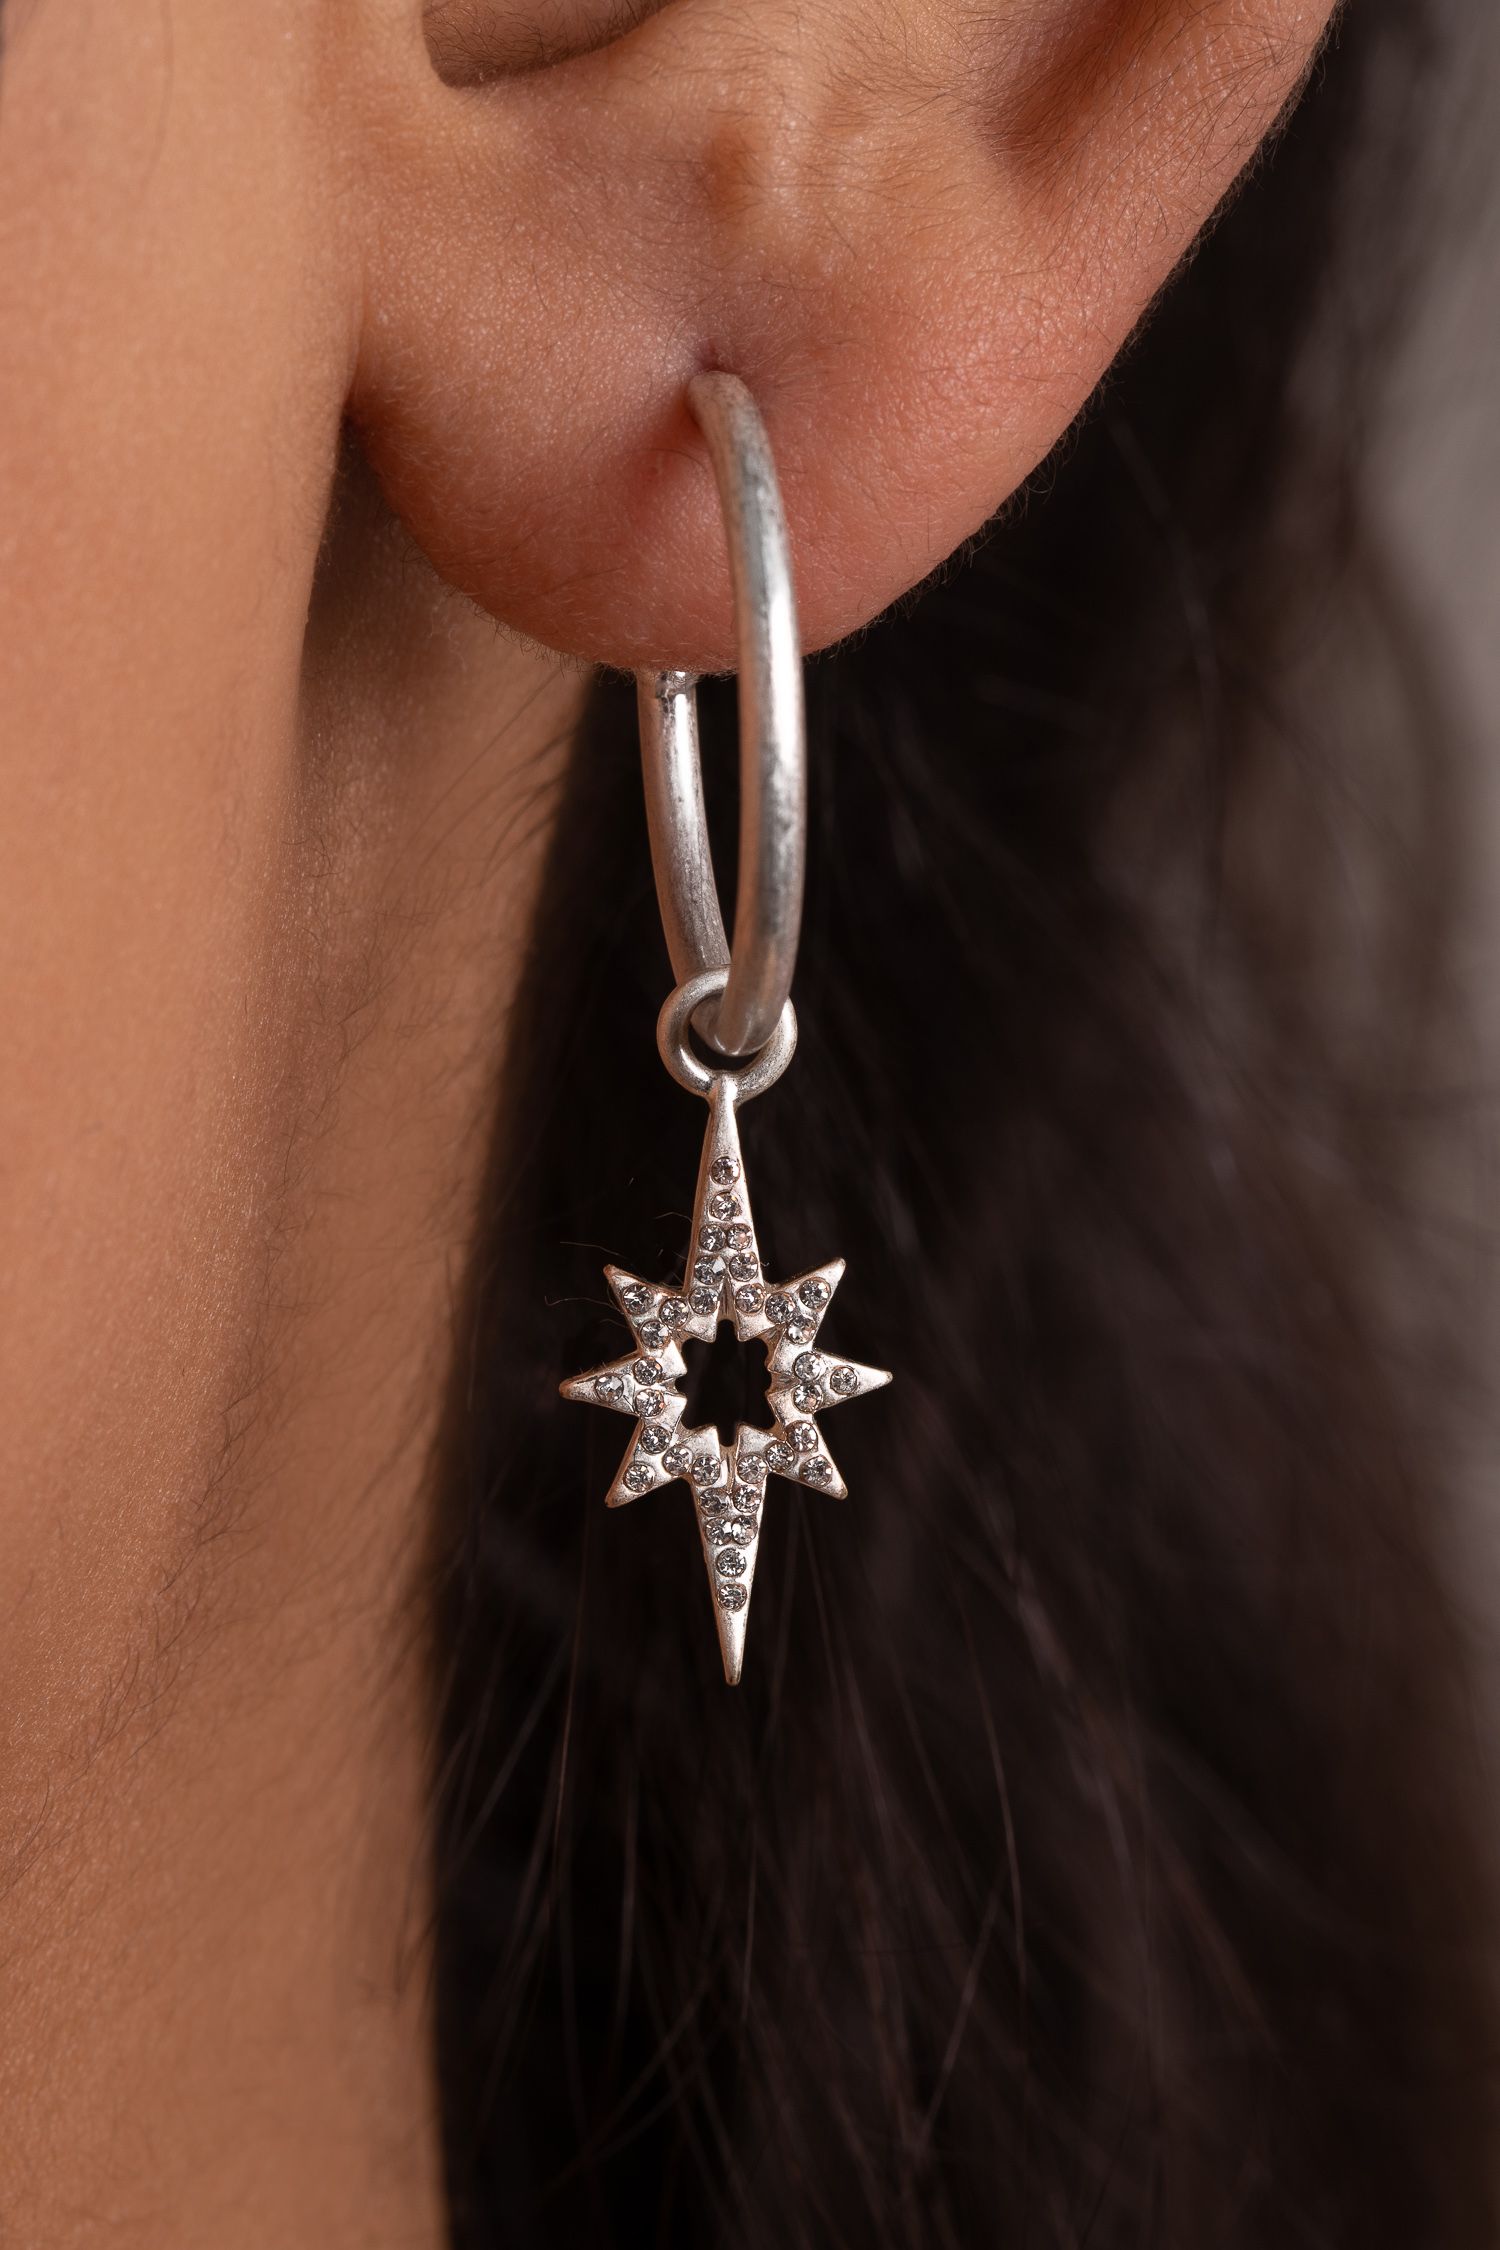 Our new Kate Thornton silver plated 'Celeste' star drop earrings will really make a style statement this season. A striking piece of jewellery which makes the perfect accompaniment to any outfit.  Delicate, eye catching and with a contemporary edge these drop earrings will look great when worn alone or paired with other styles for a really on trend look. The silver tone earrings feature an 18mm hoop and delicate 27mm pave star charm. Presented in a KTx jewellery pouch to keep your jewellery safe or ideal for gifting!